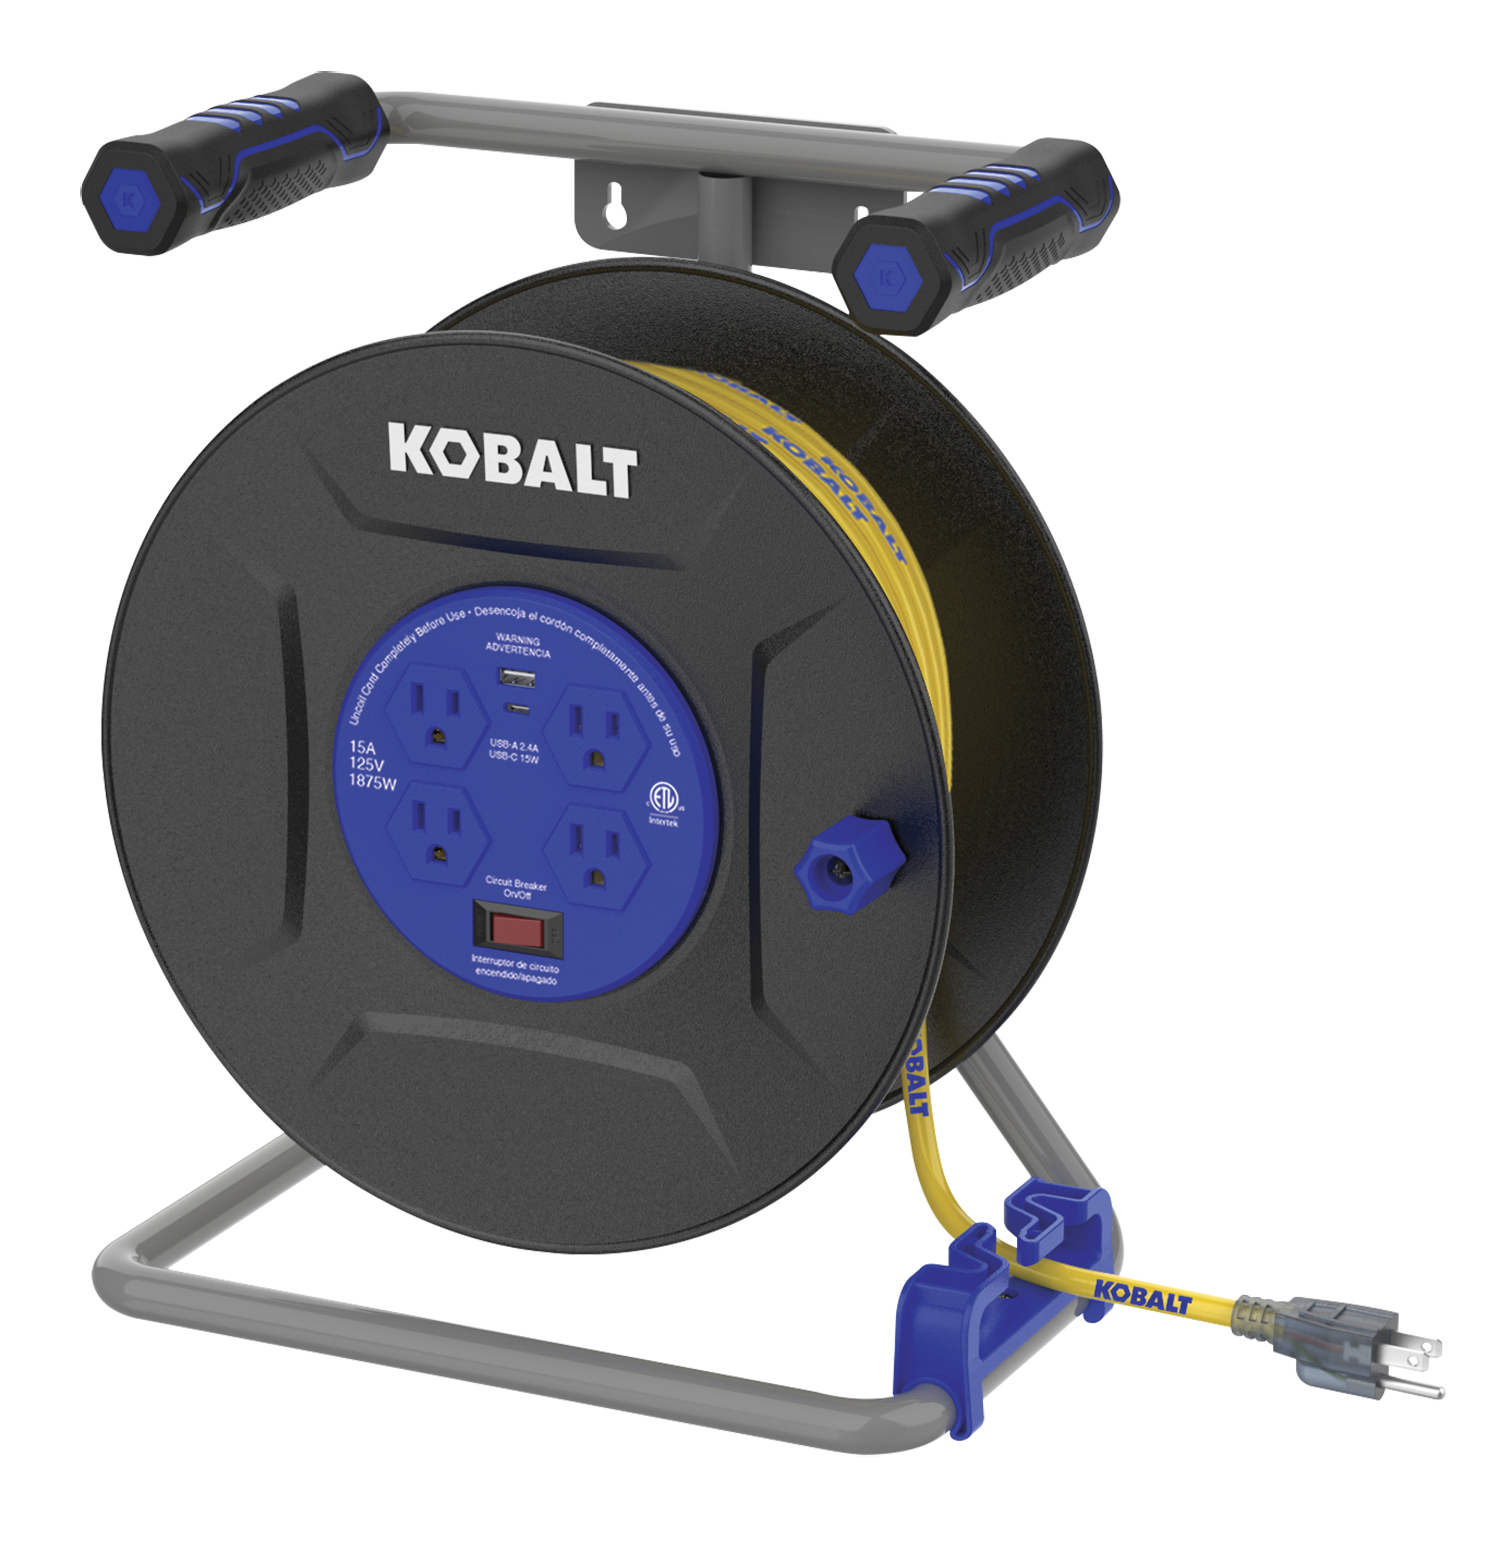 Kobalt 4-Outlet Portable Thermoplastic Power Station Cord Reel w/ 75ft 12/3 Yellow SJTW Cord with 1 USB-A and 1 USB-C | LKCRPD832U